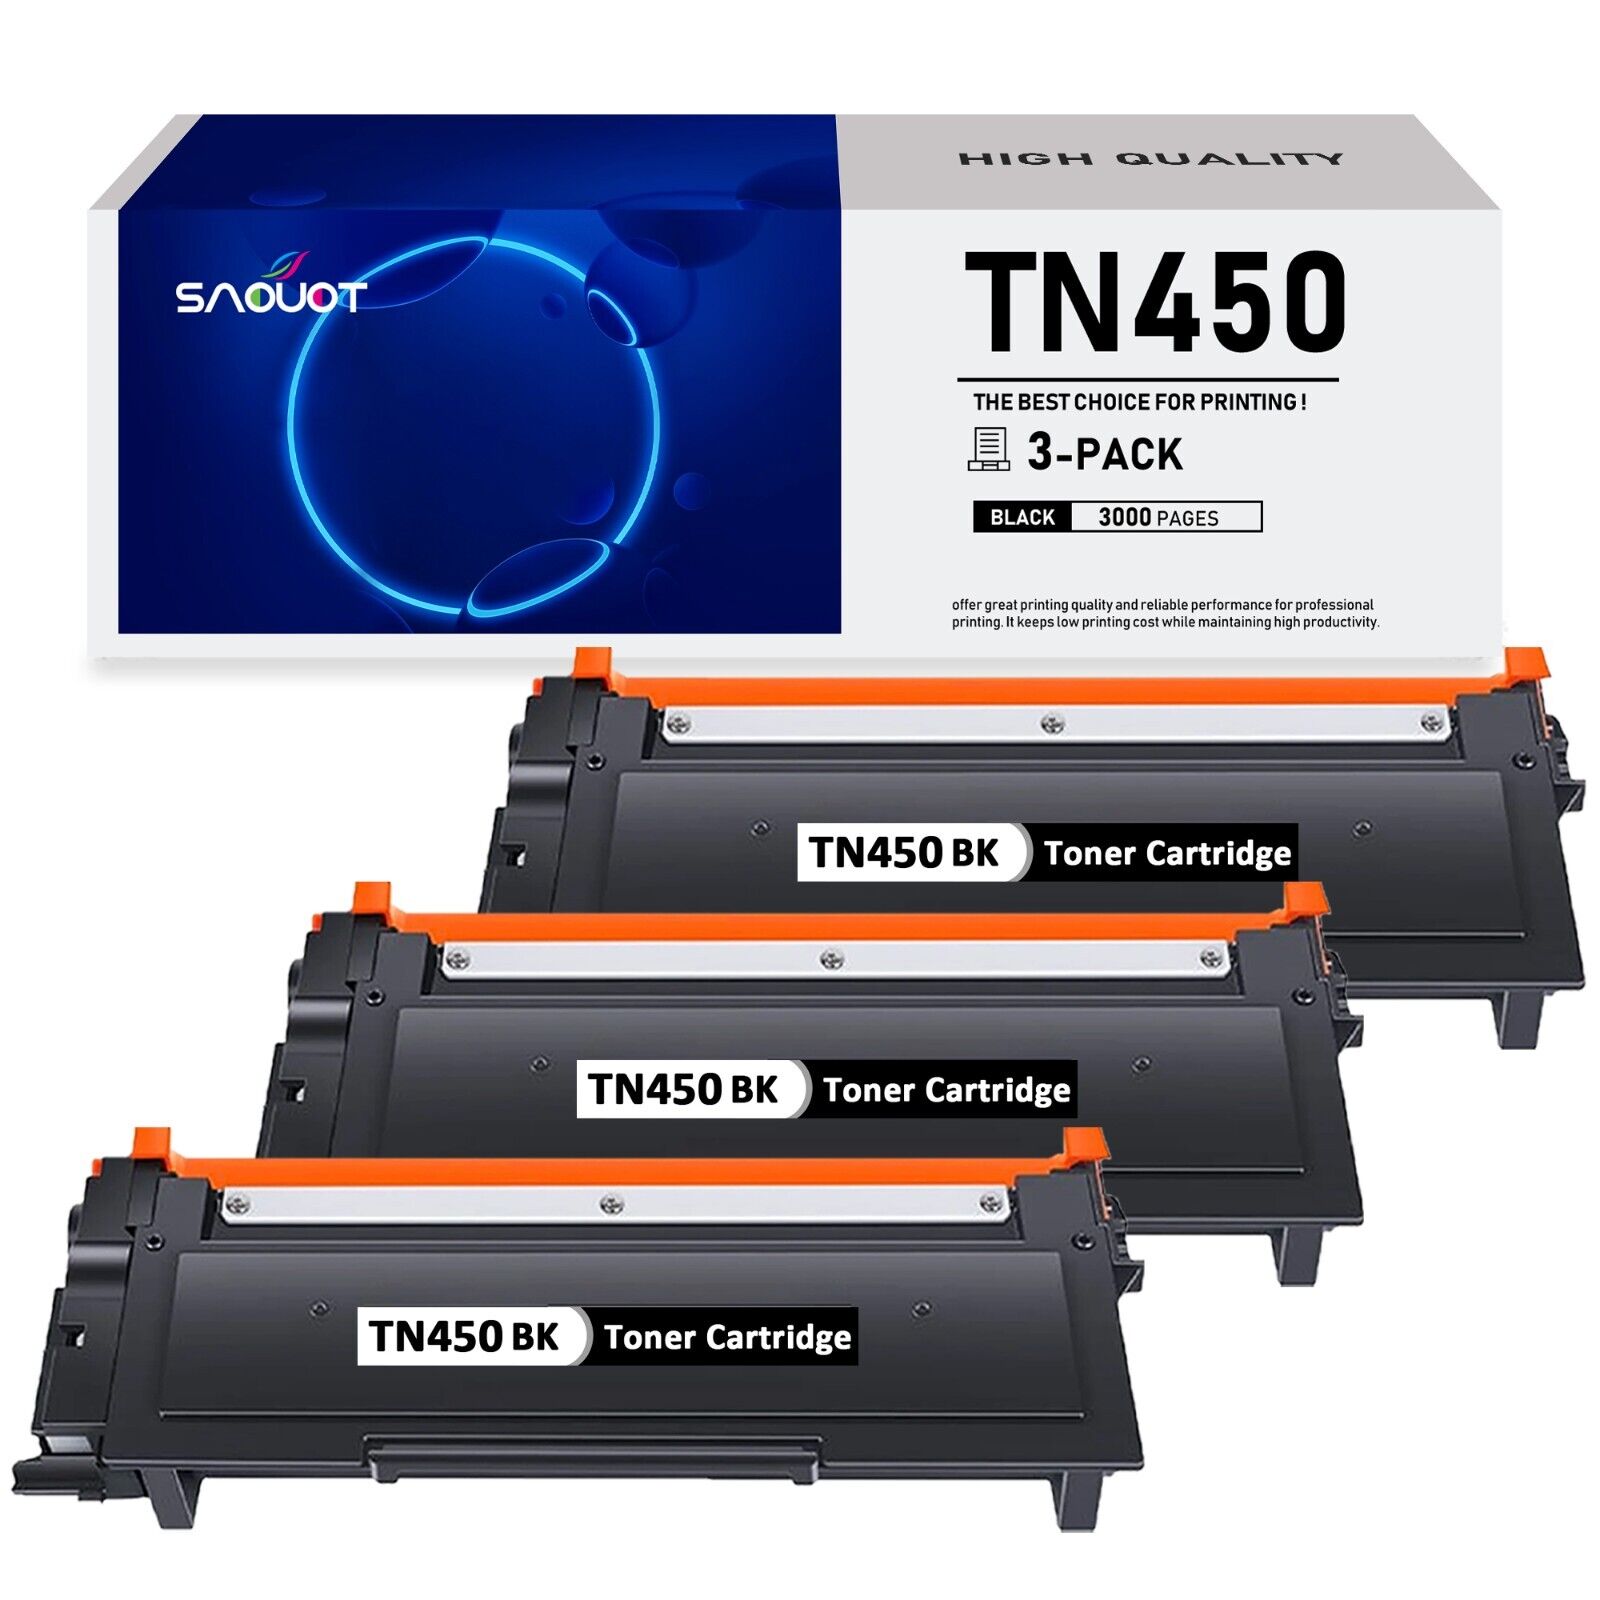 TN450 Toner Cartridge Replacement for Brother HL-2270DW 2280DW 2230 2240